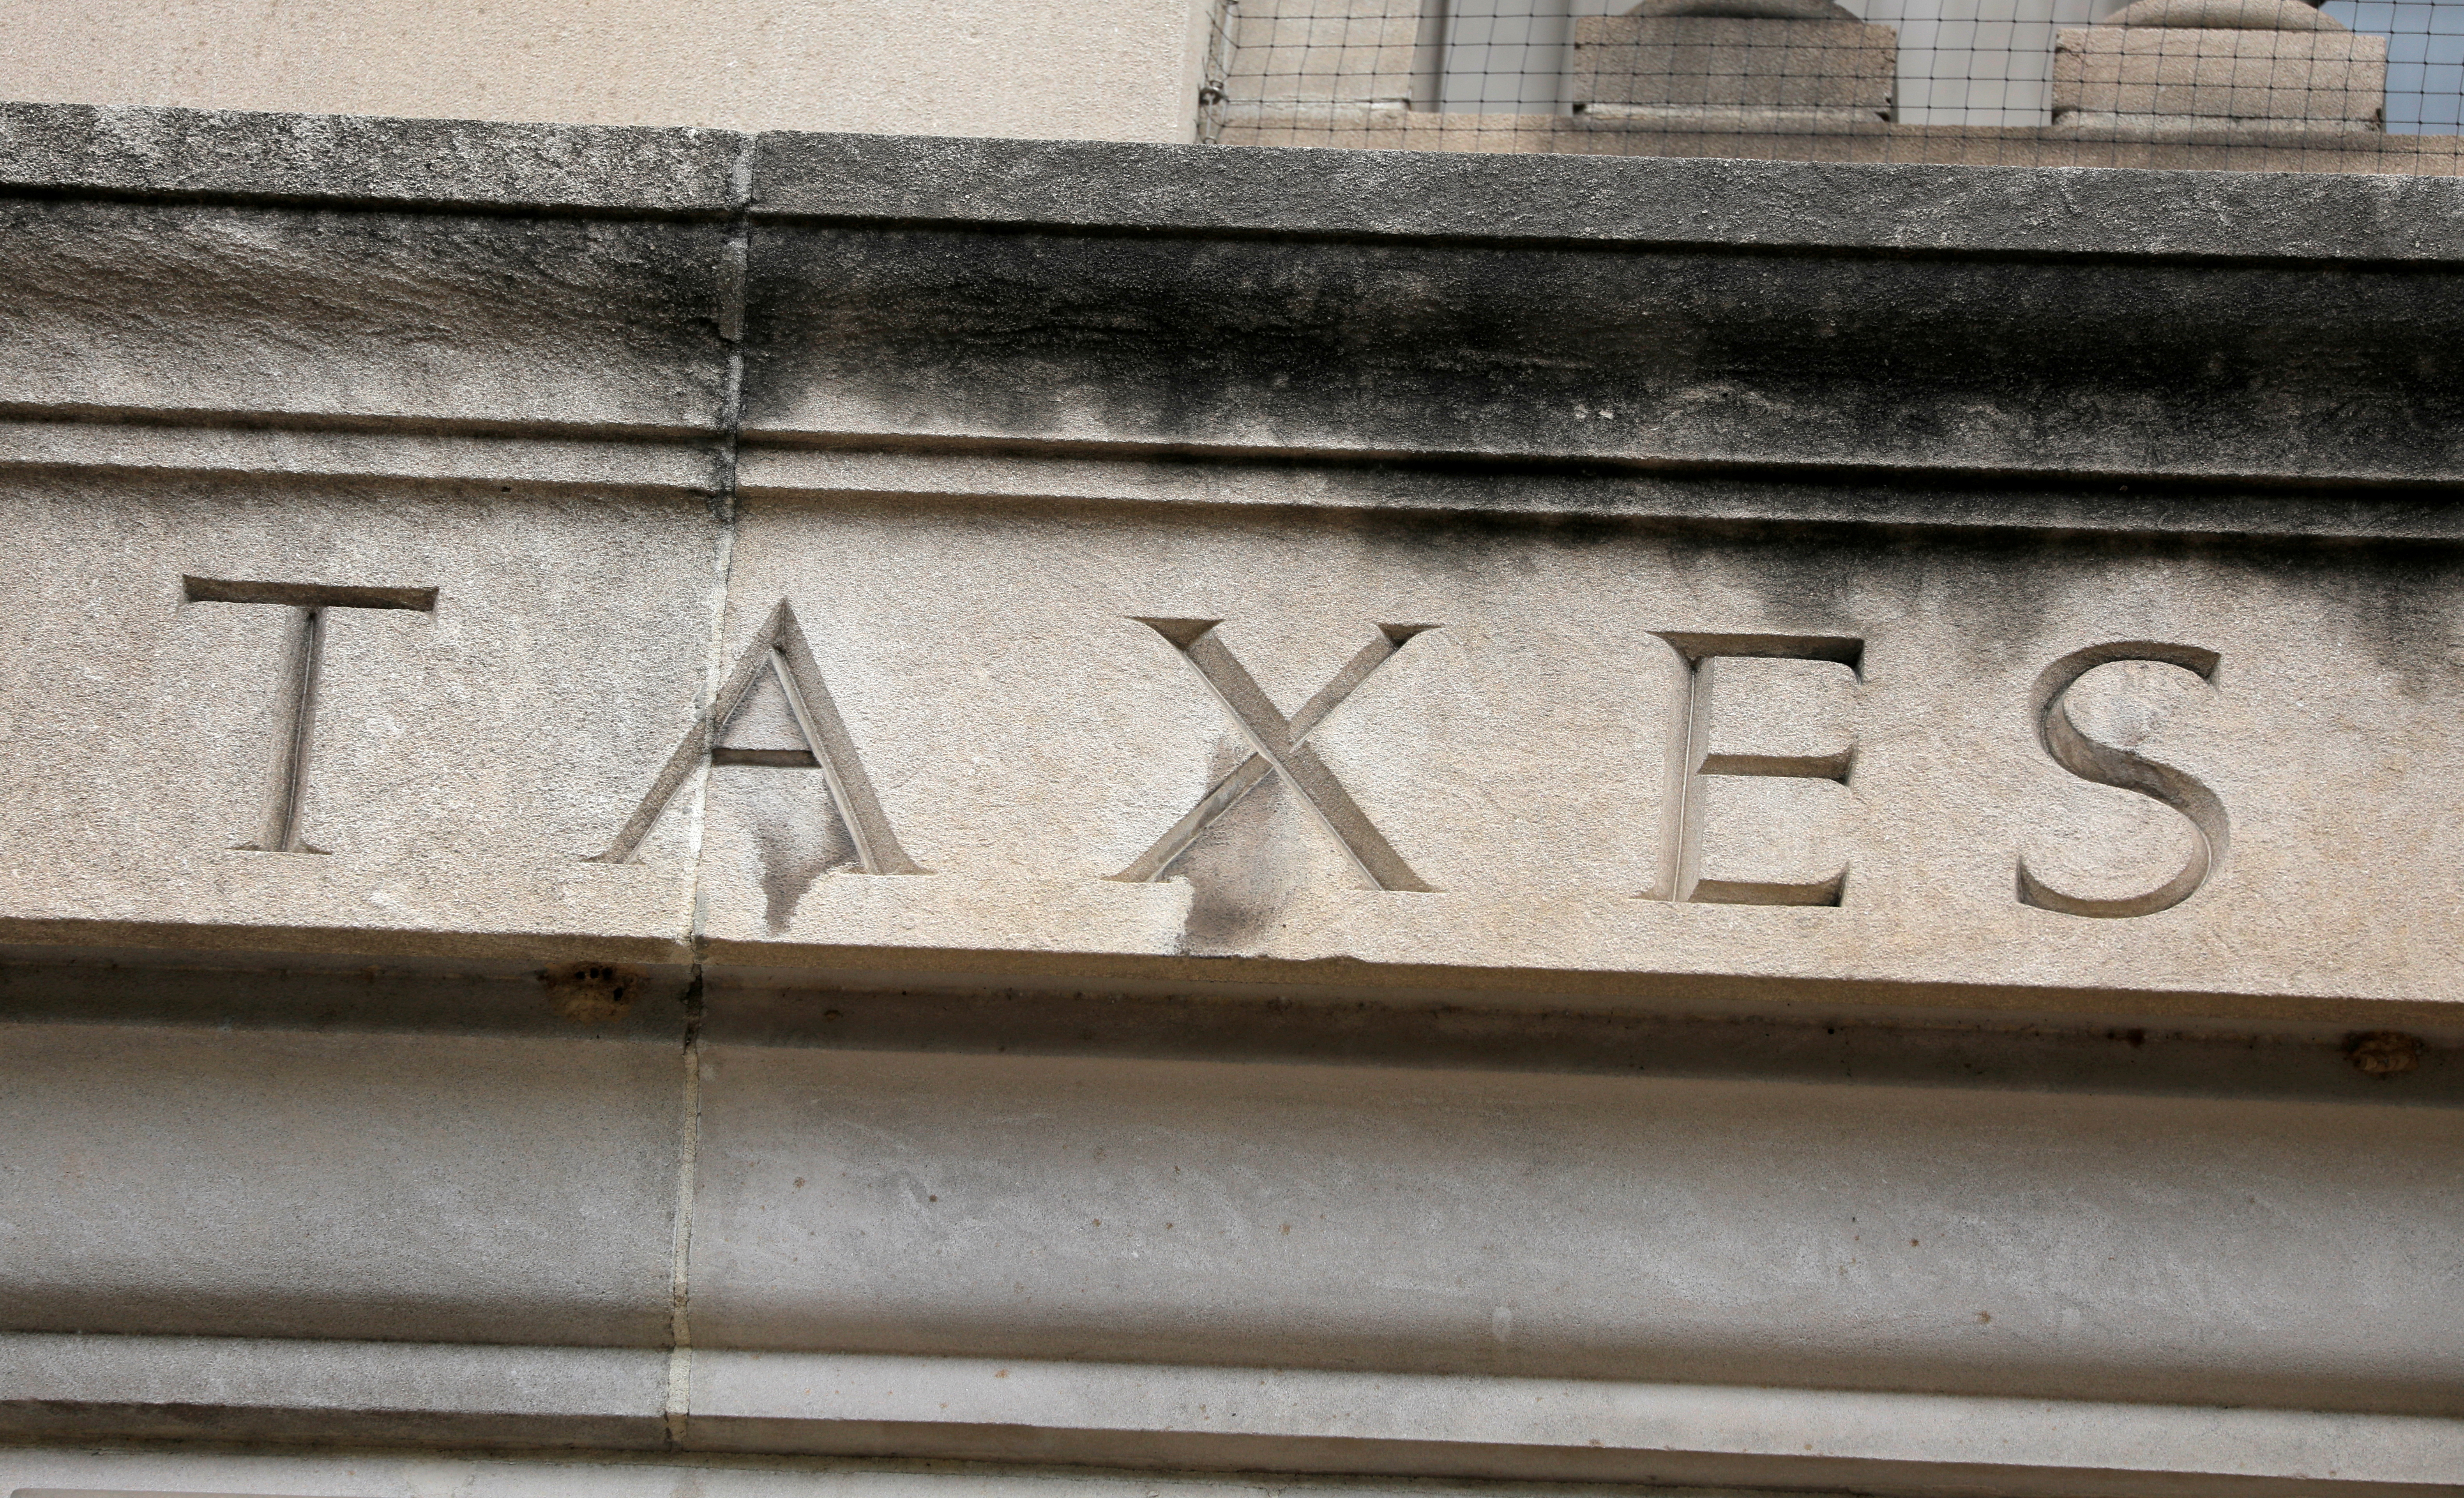 The word "taxes" is seen engraved at the headquarters of the Internal Revenue Service (IRS) in Washington, D.C.